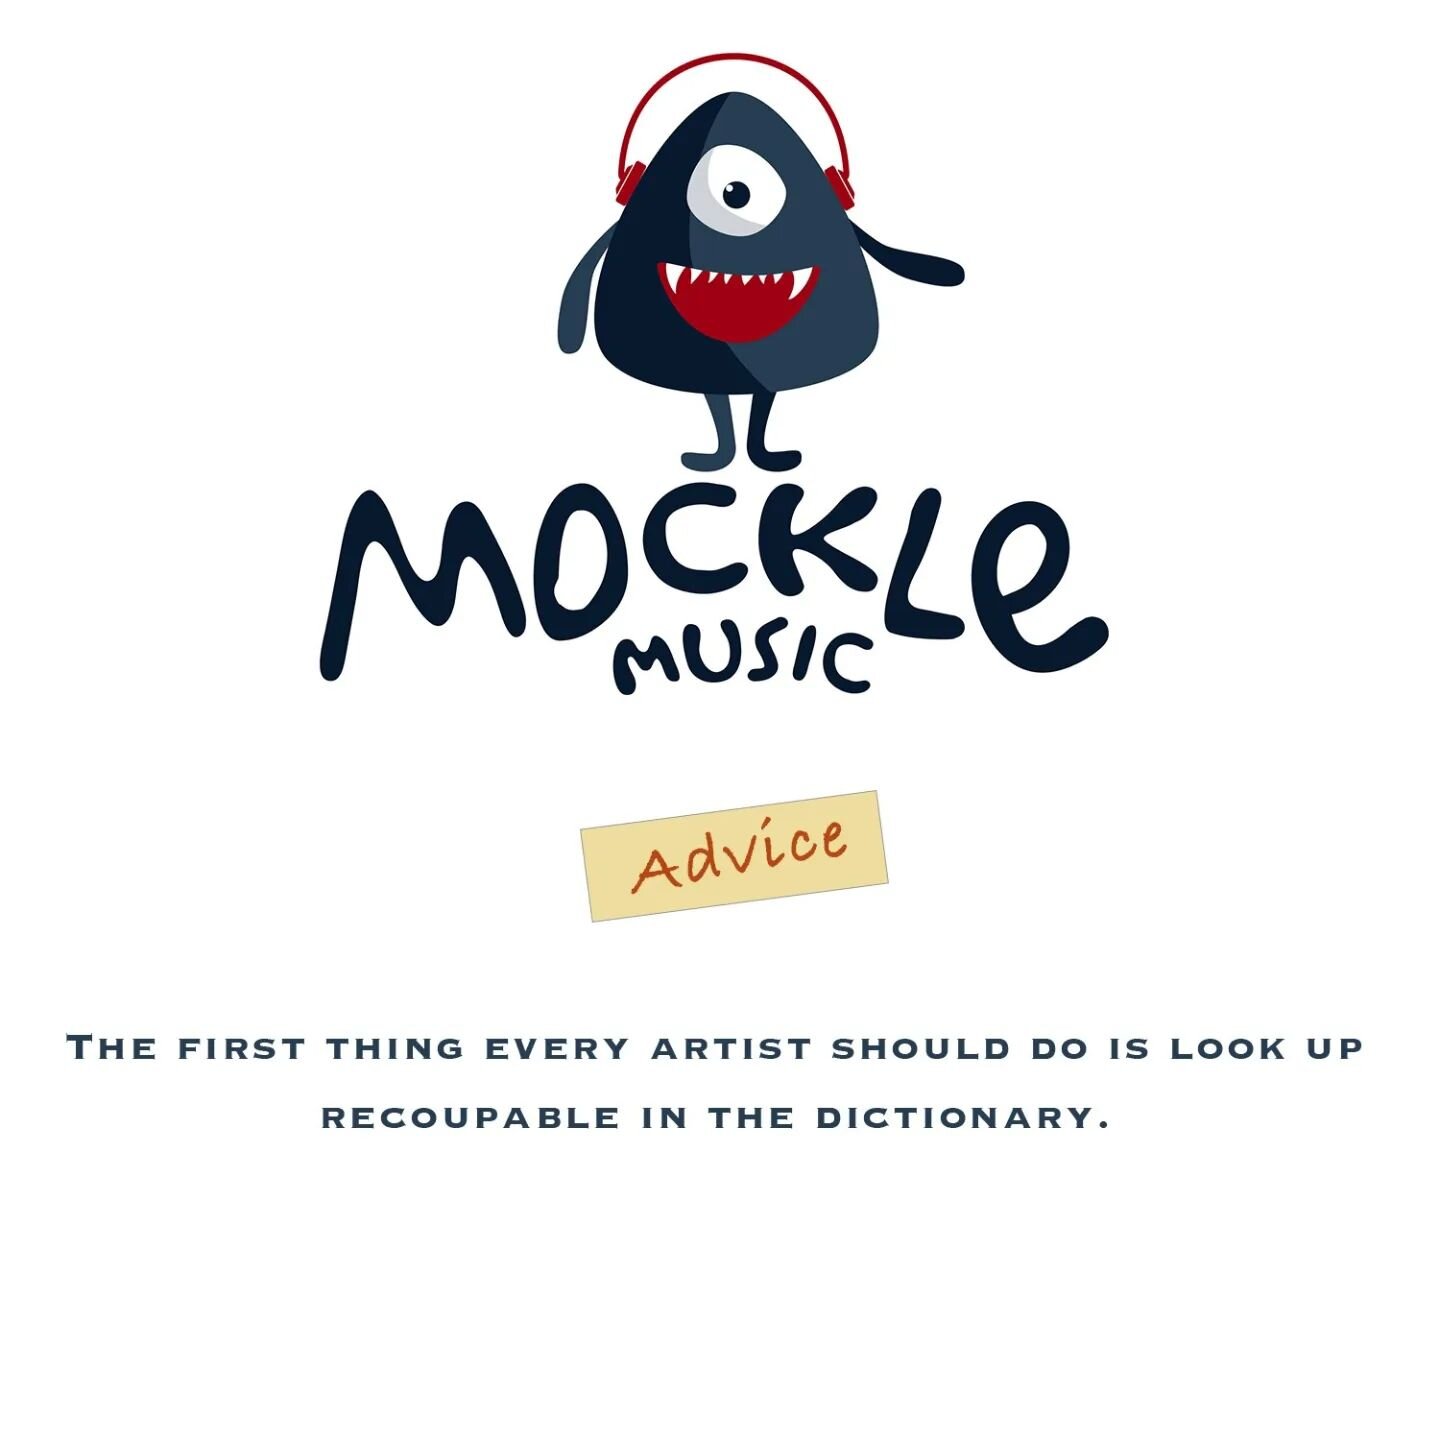 Our new weekly tip for all musicians out there! With love from Mockle Music ✨ And remember: Every mickle mek a mockle 🎶!

#everymicklemekamockle 
#mocklemusic 
#musicbuisness 
#music
#tipoftheday